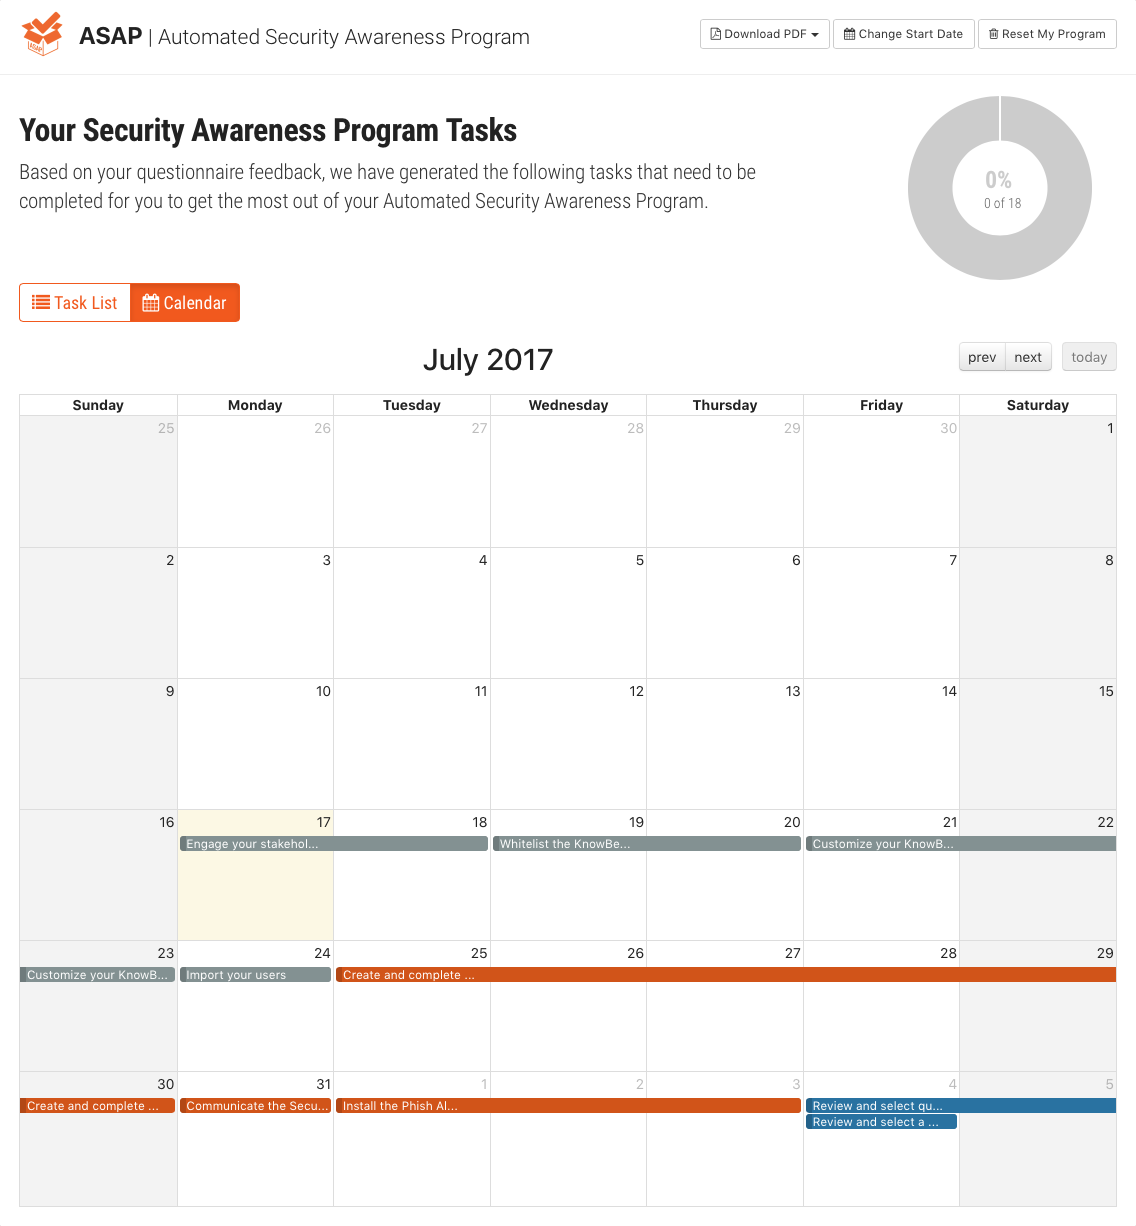 KnowBe4 Releases Innovative, Customizable Automated Security Awareness Program Builder: ASAP